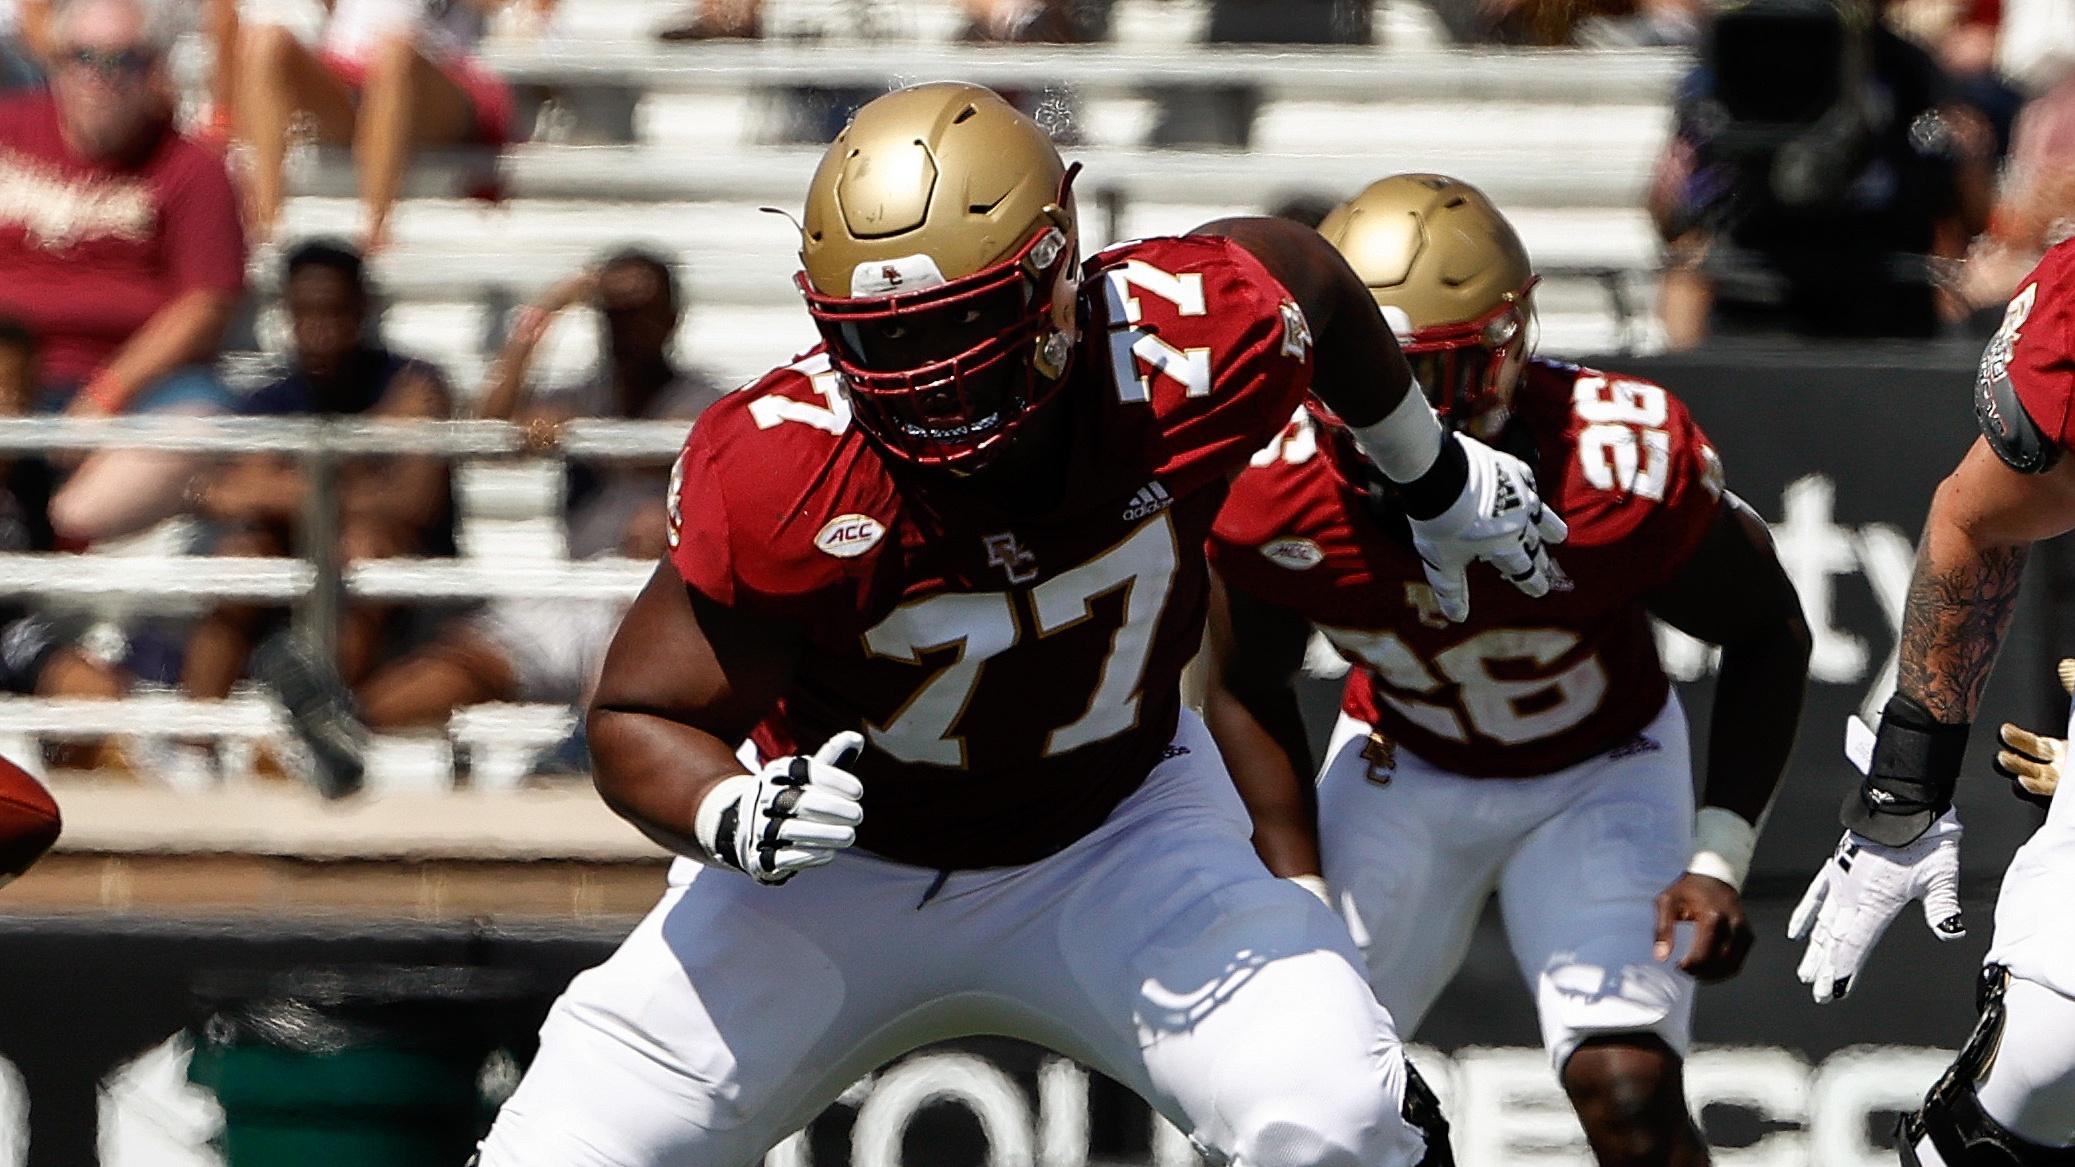 Sep 4, 2021; Chestnut Hill, Massachusetts, USA; Boston College Eagles offensive lineman Zion Johnson (77) looks to block against the Colgate Raiders during the first half at Alumni Stadium. Mandatory Credit: Winslow Townson-USA TODAY Sports / © Winslow Townson-USA TODAY Sports